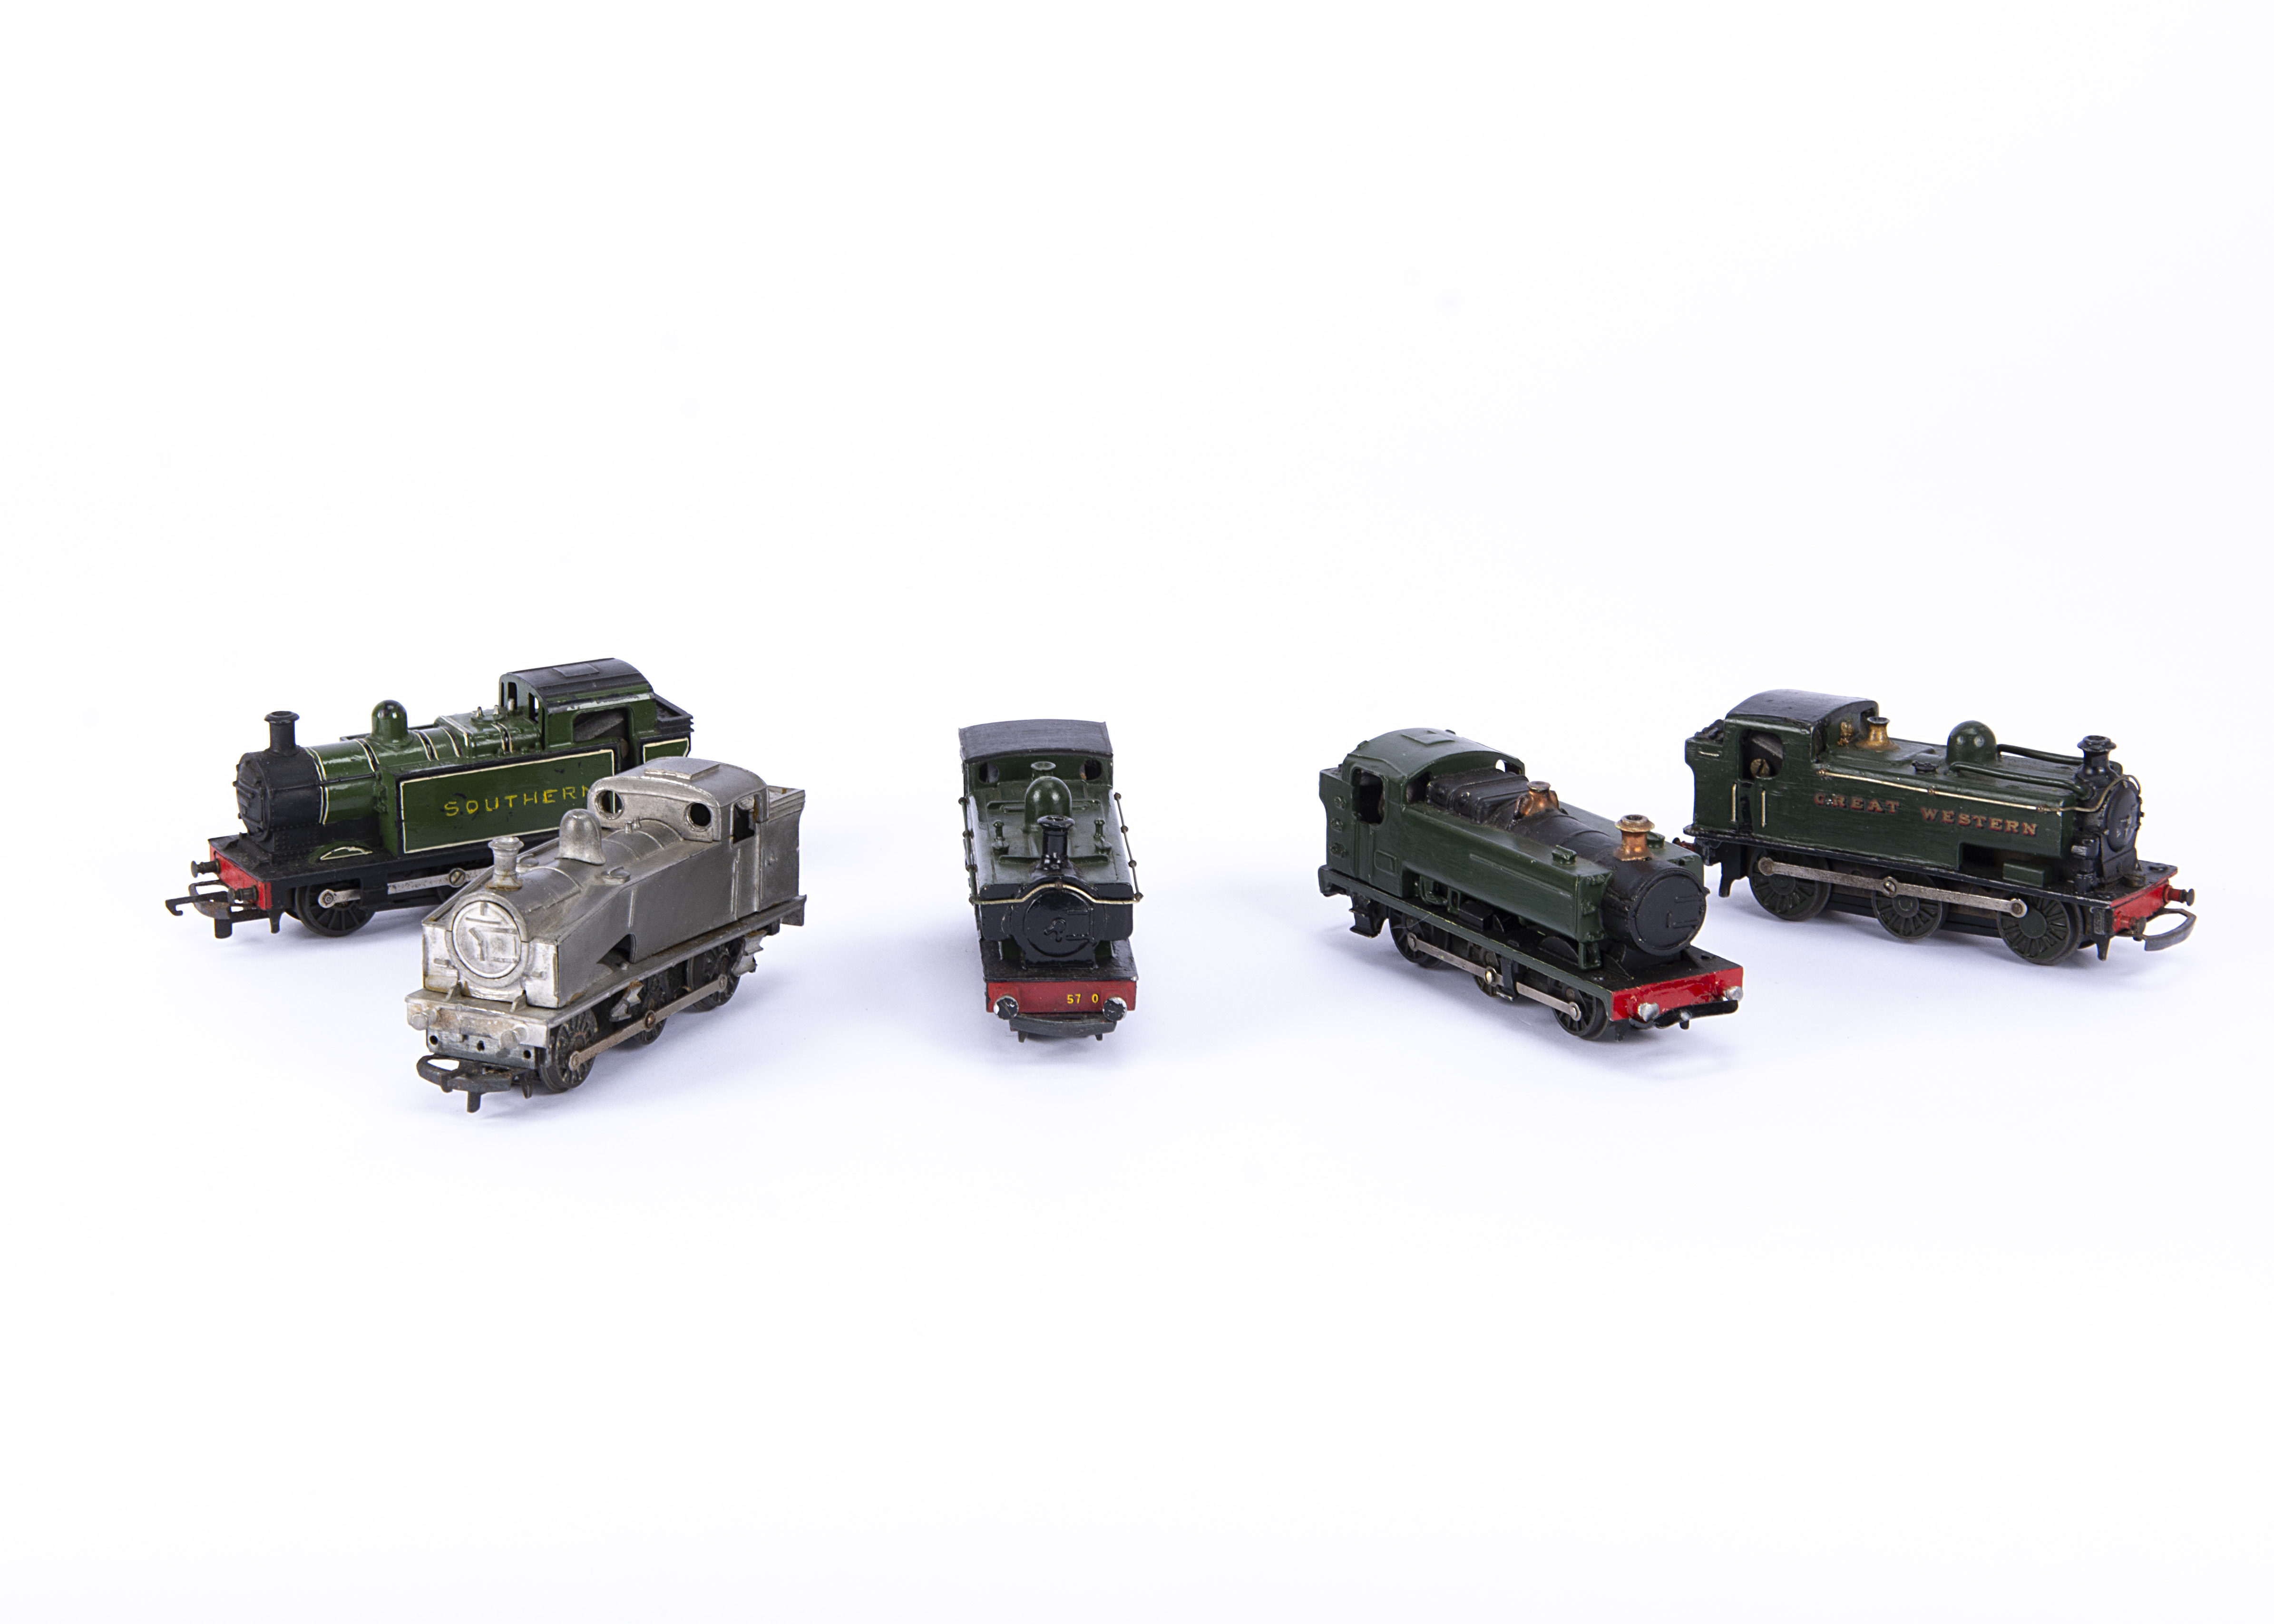 Tri-ang TT Gauge 0-6-0 Tank Locomotives with kitbuilt or repainted bodies all with Tri-ang